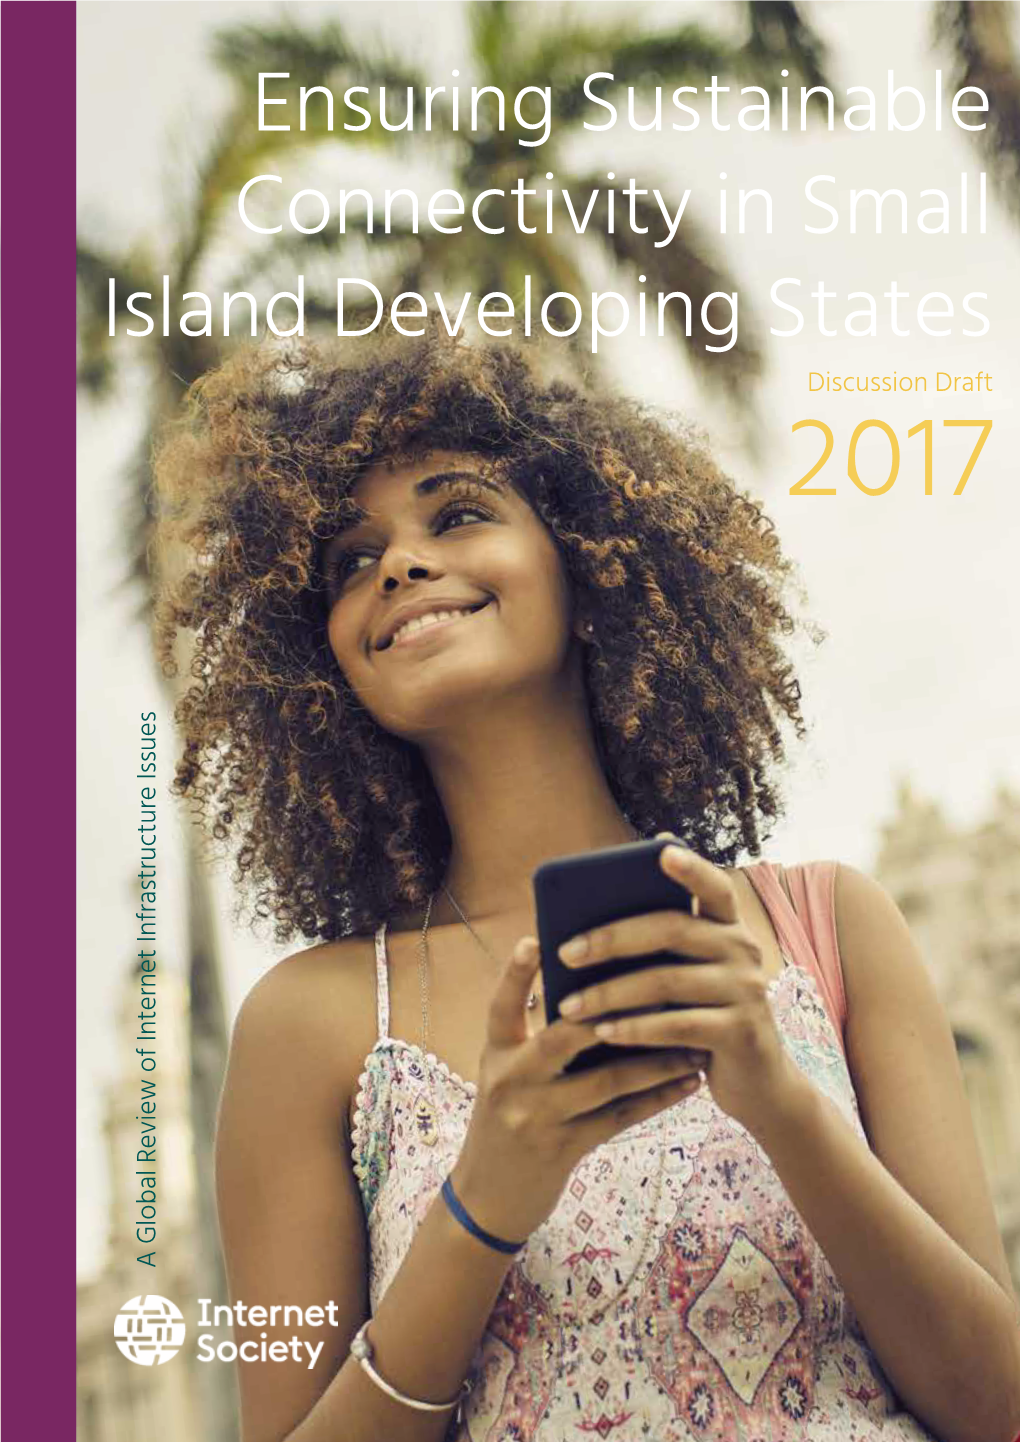 Ensuring Sustainable Connectivity in Small Island Developing States